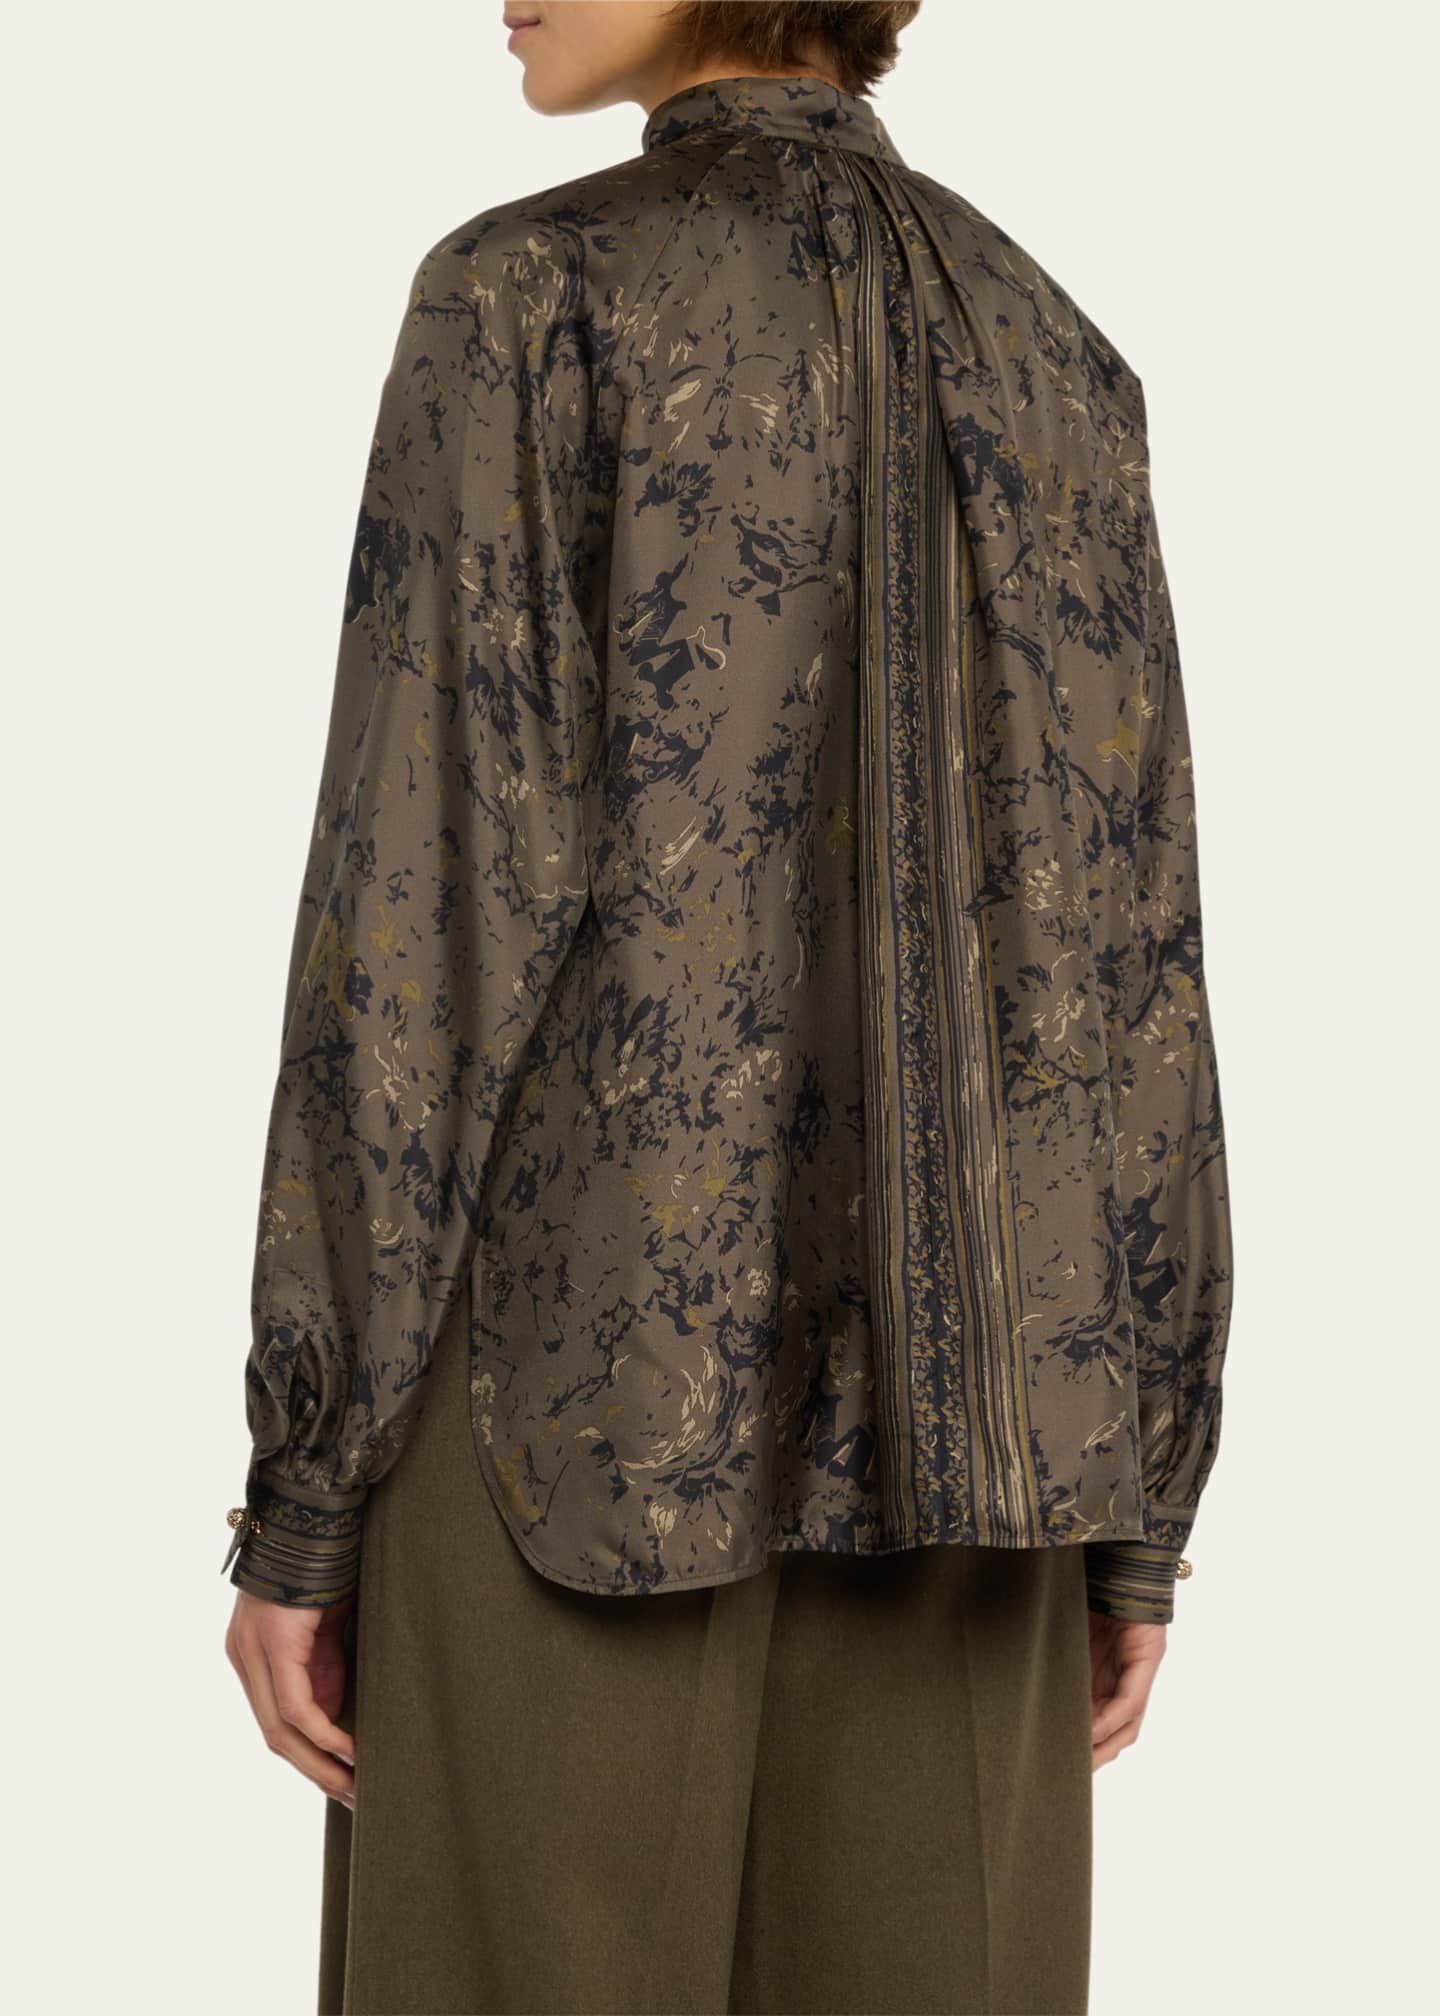 Max Mara Ardenne Floral Print Blouse with Tie Neck - Bergdorf Goodman